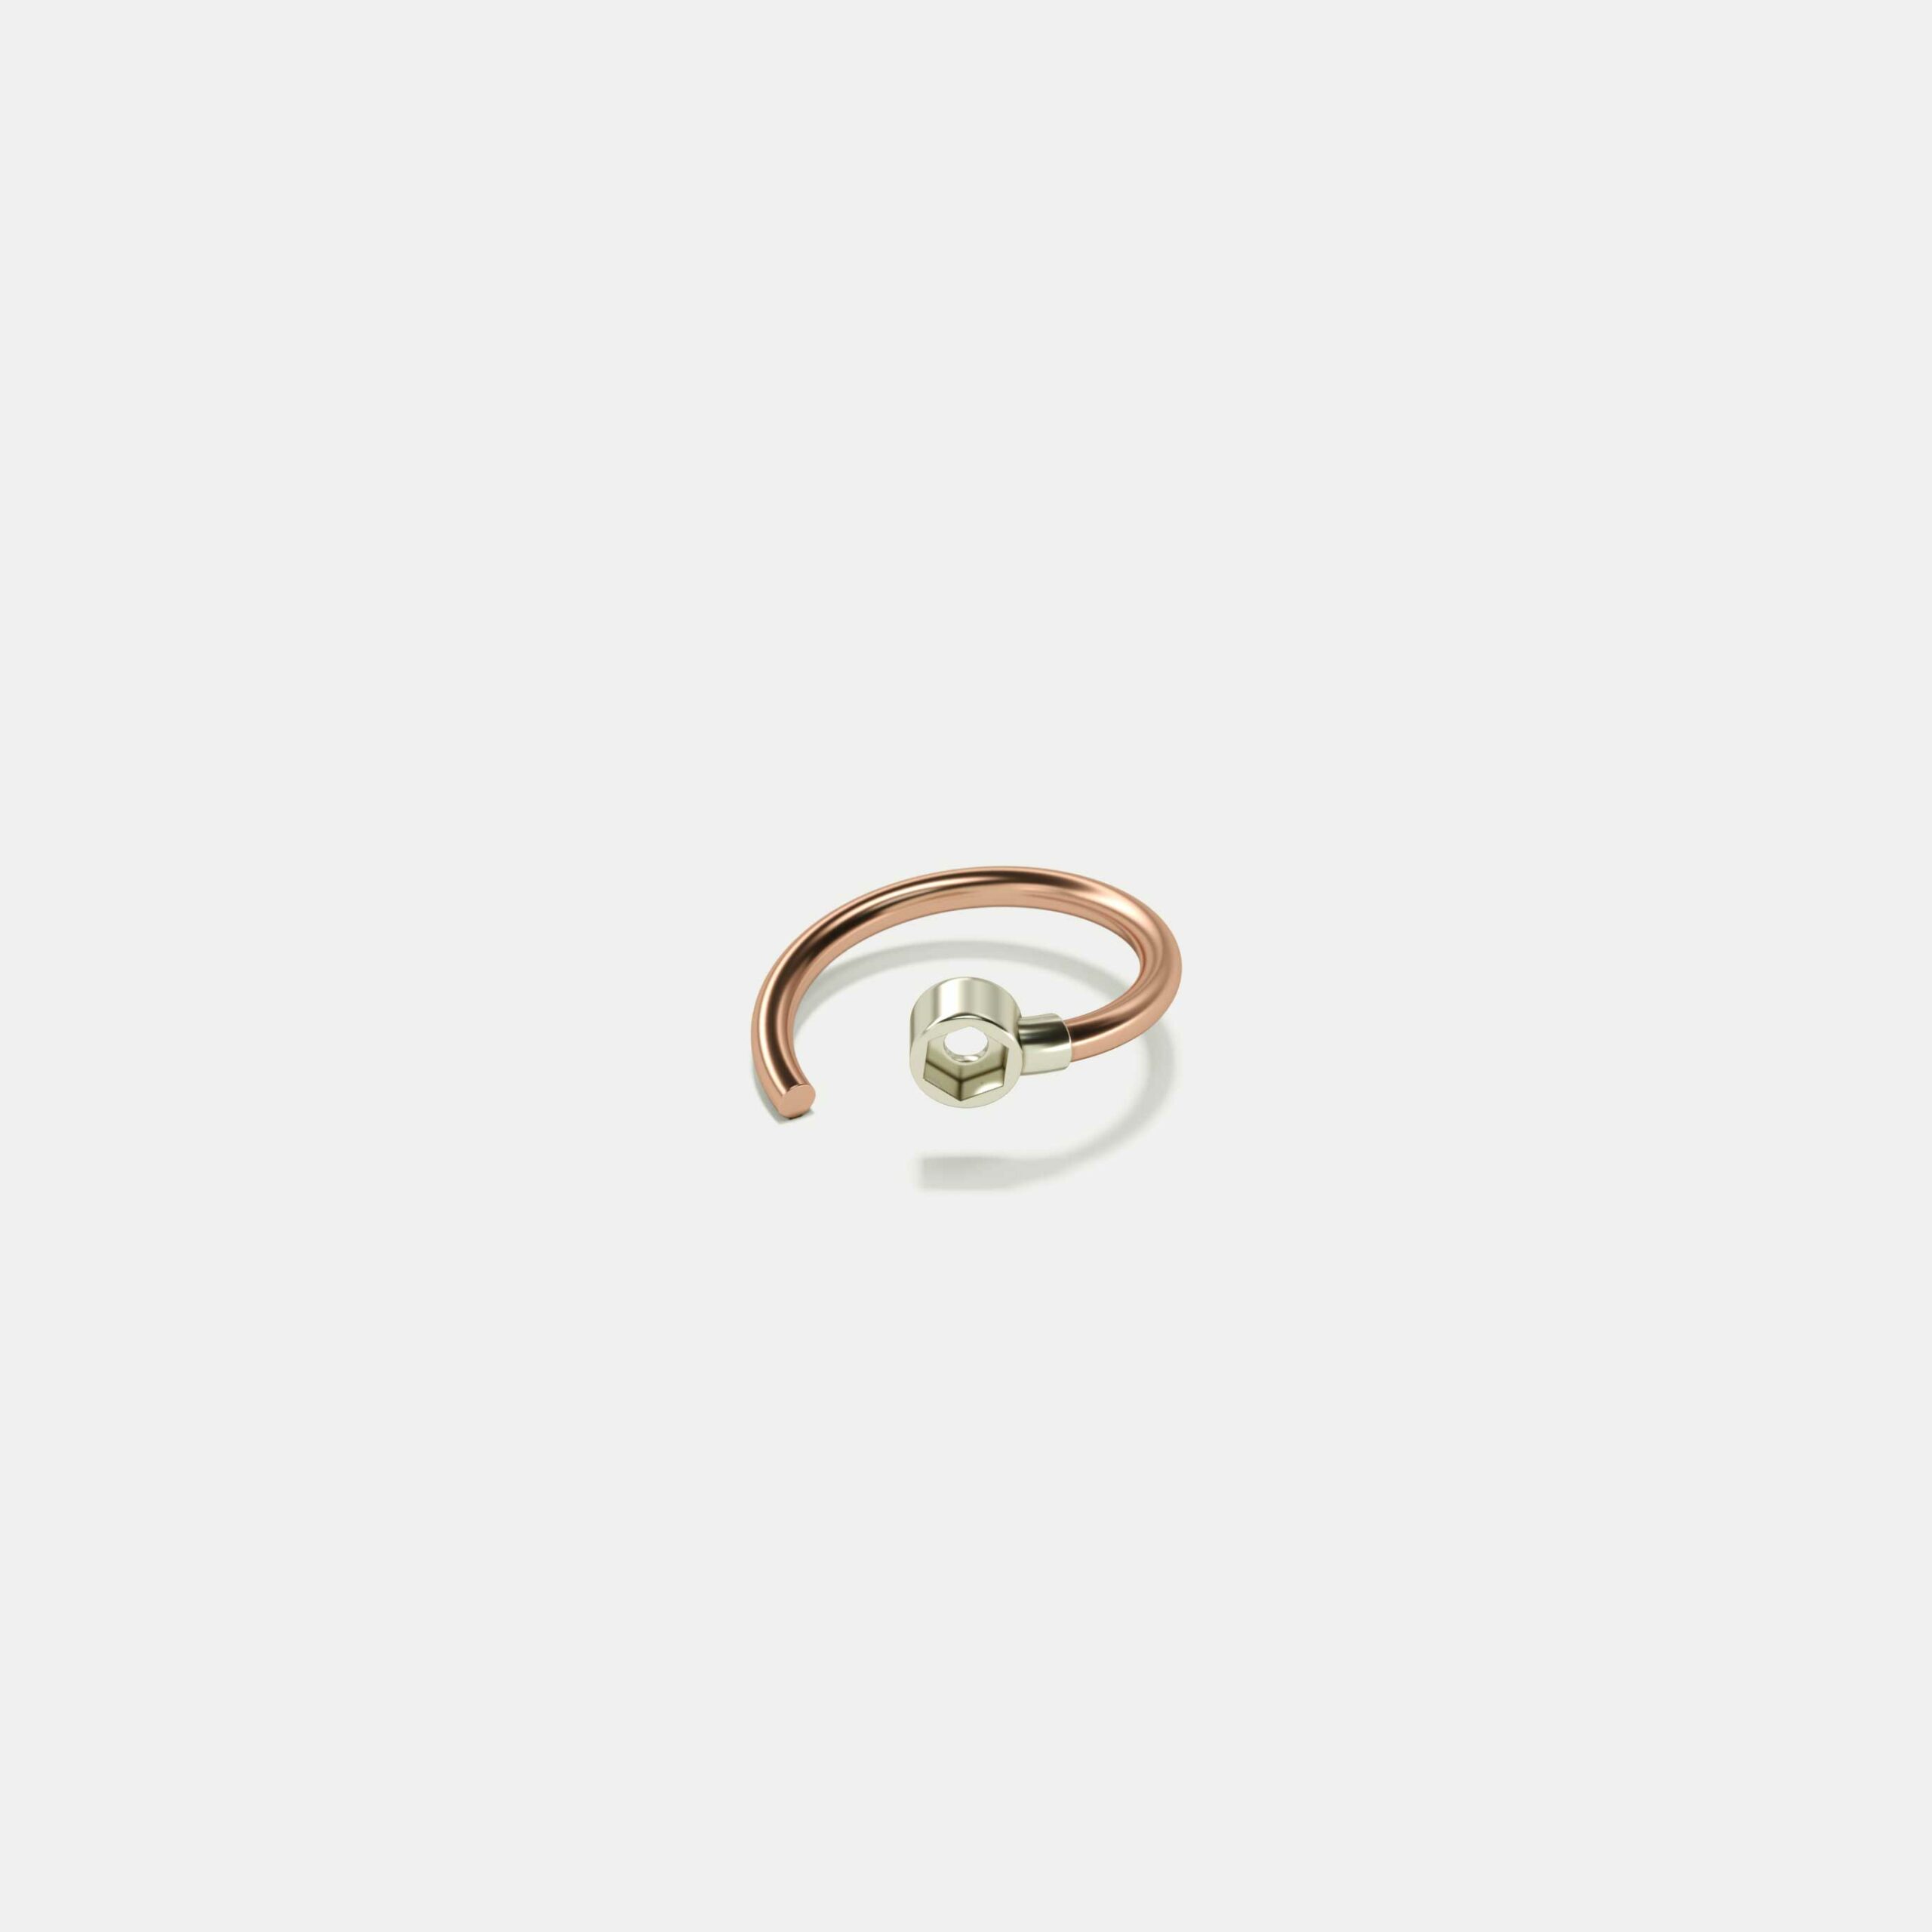 Ring № 1 in pink gold